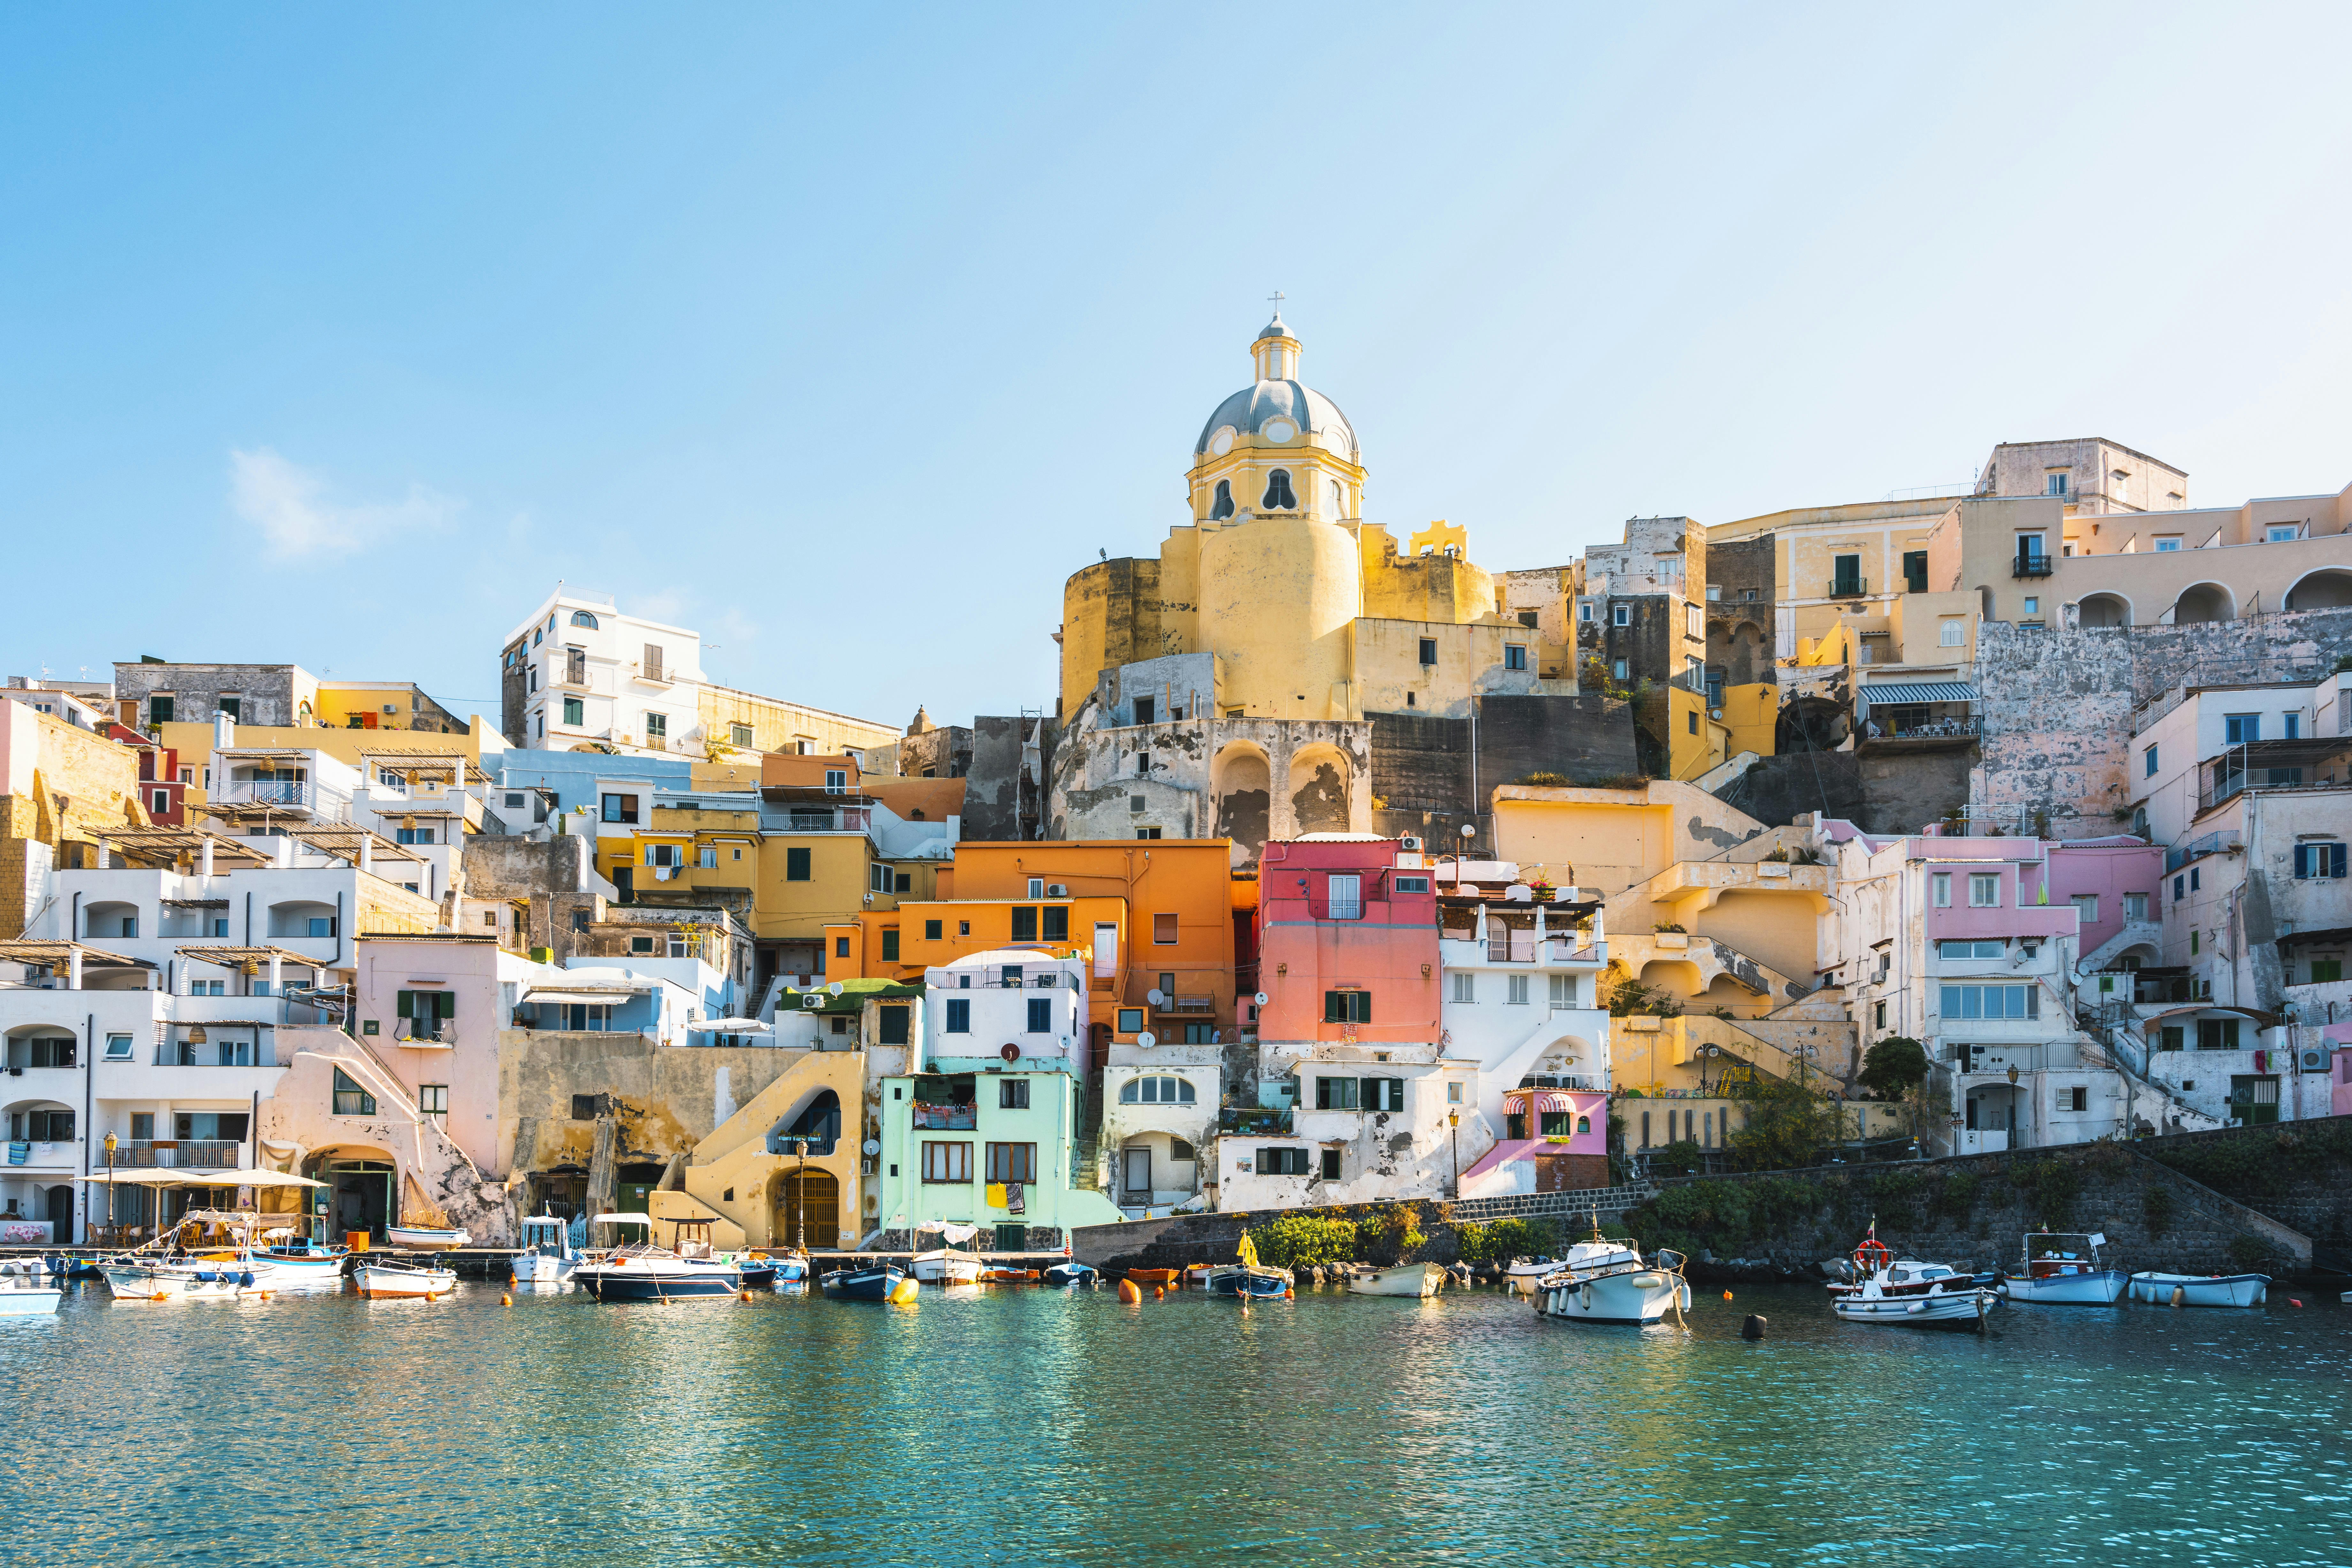 The vibrantly colored buildings of the port of Procida, seen from the water